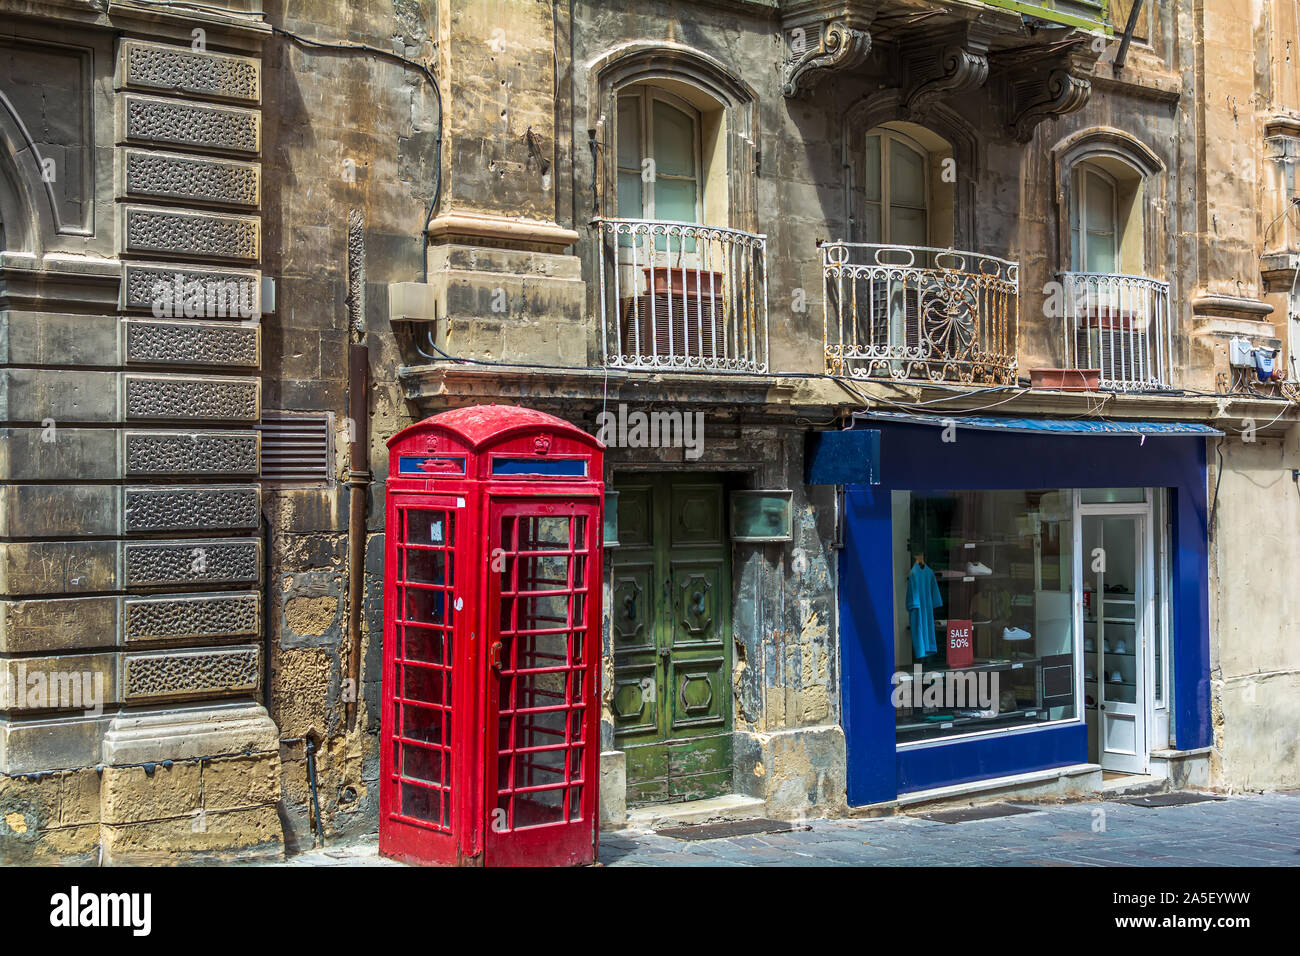 London-style iconic red phone box standing next to run-down old building and bright show-window of clothing store in Valletta, Malta. Stock Photo